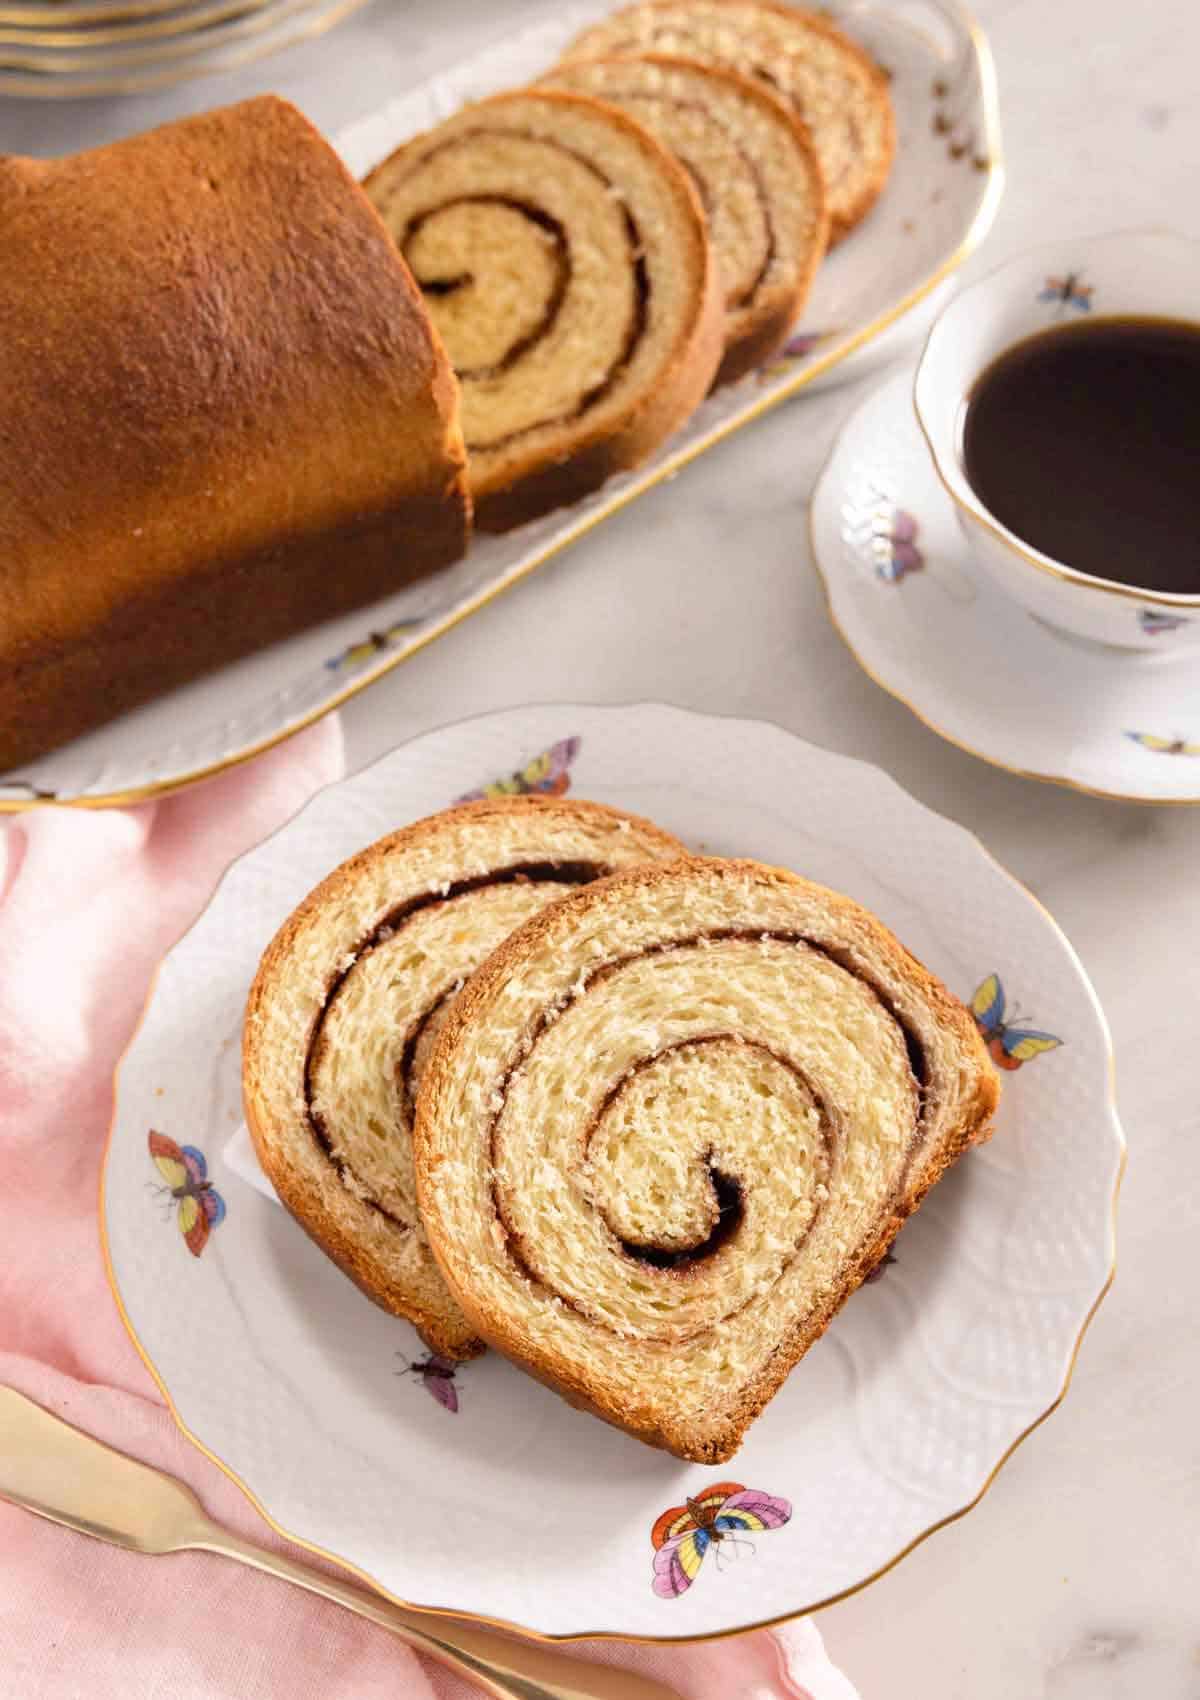 Two slices of cinnamon swirl bread on a plate by a mug of coffee.